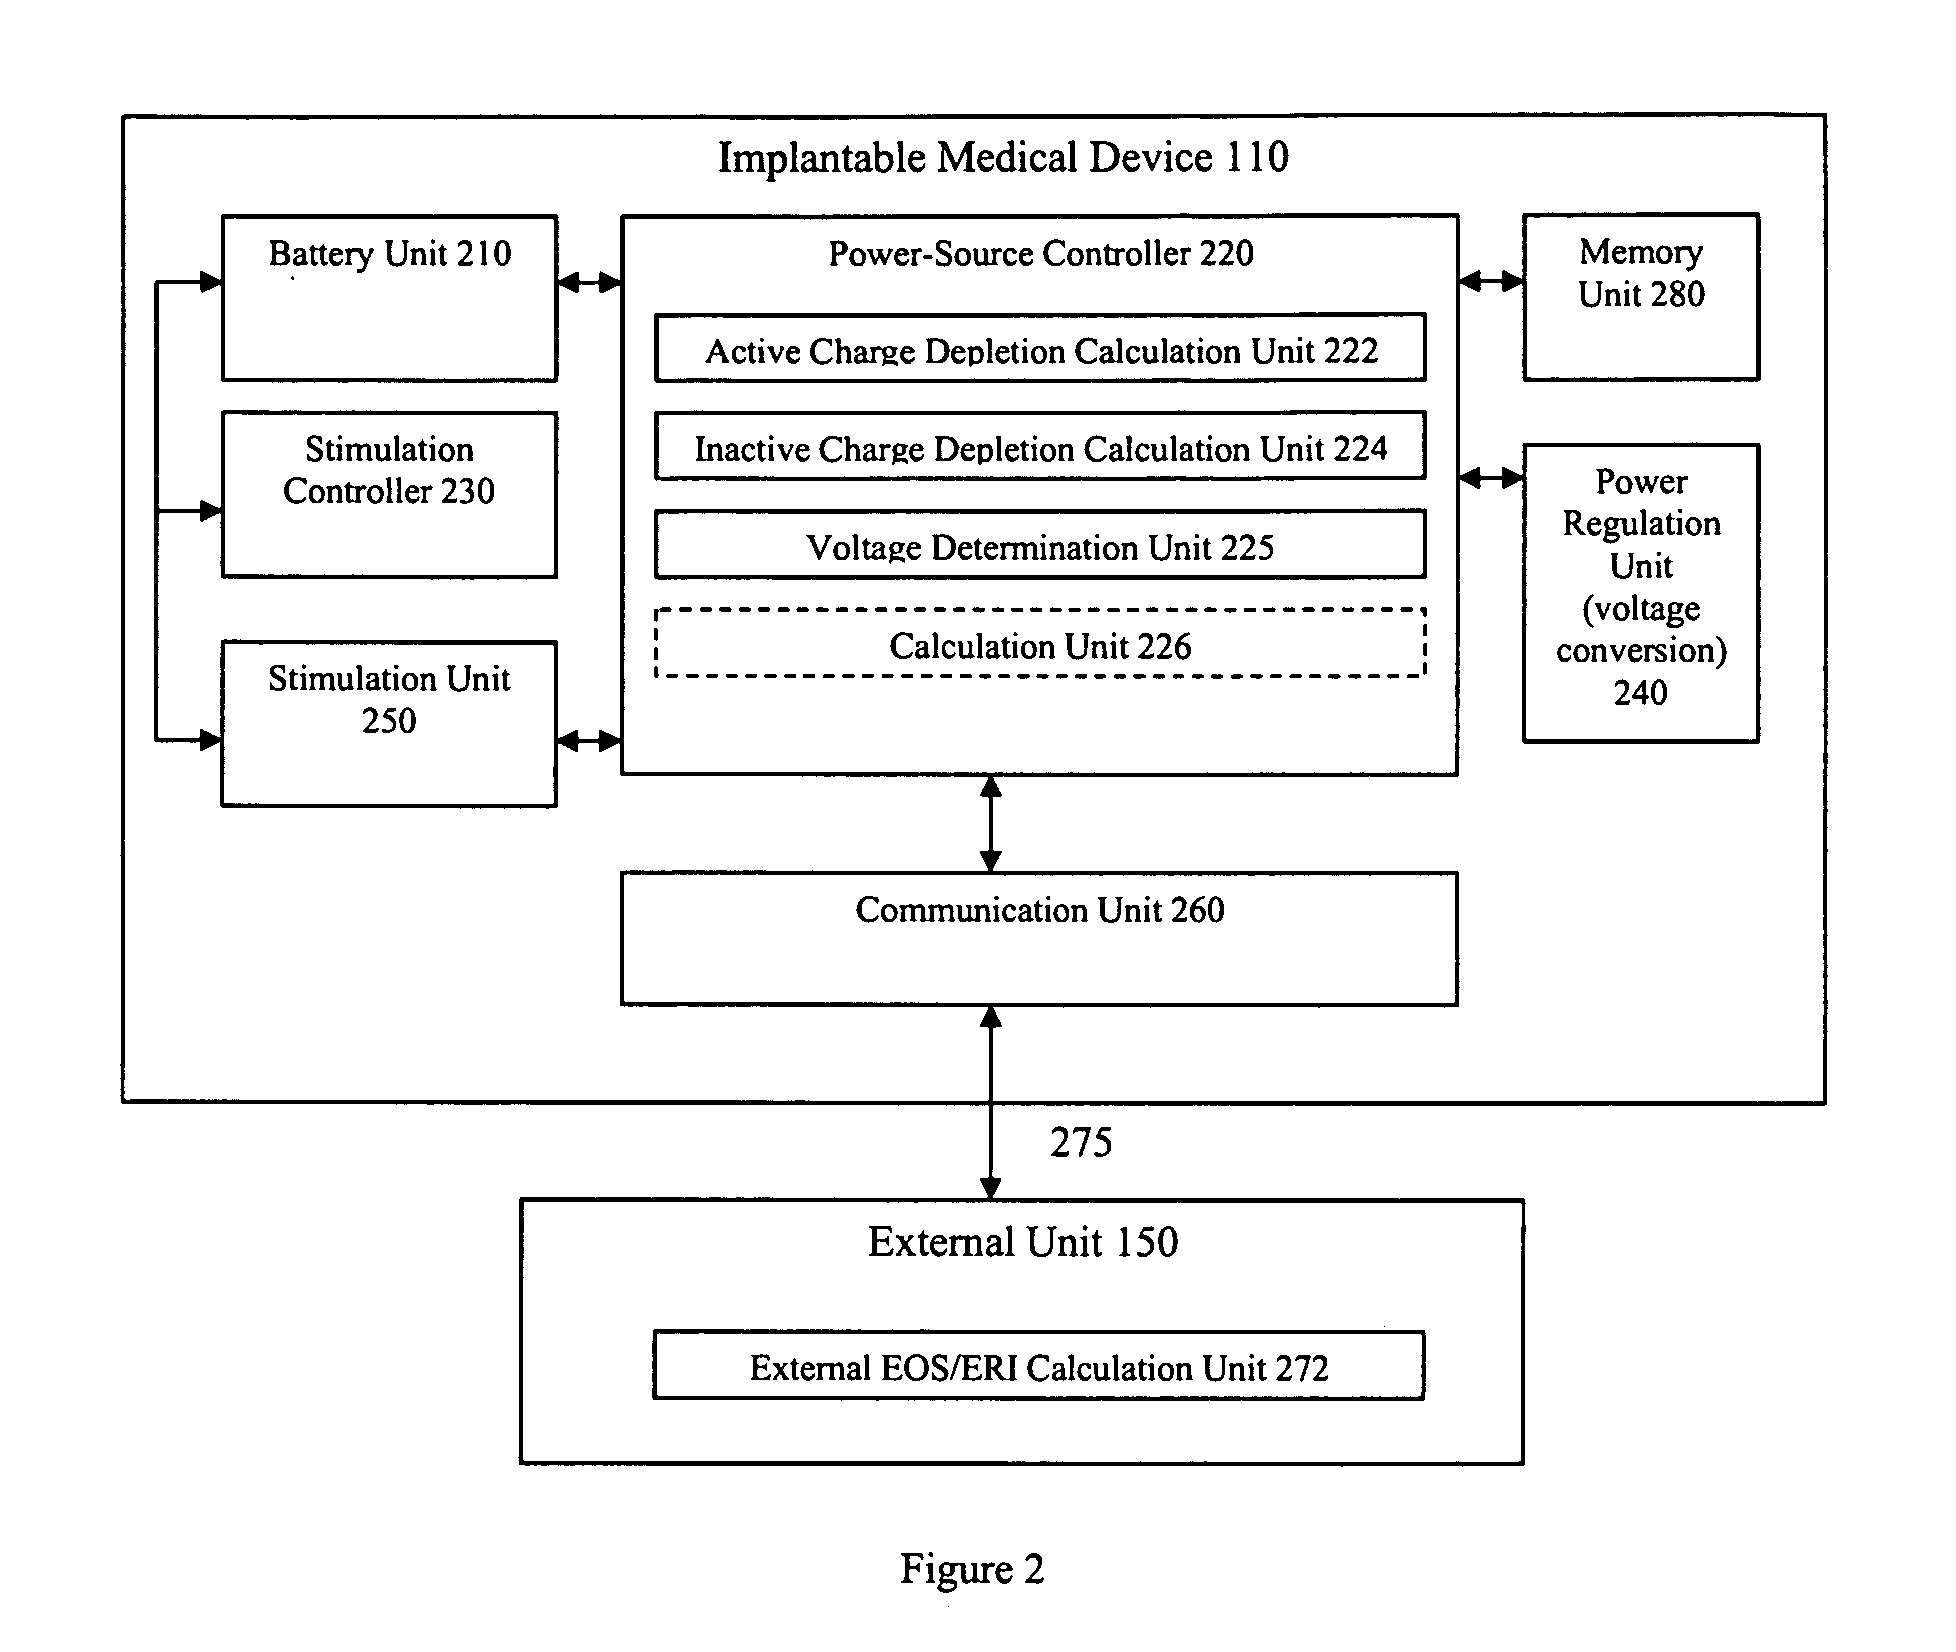 Power supply monitoring for an implantable device